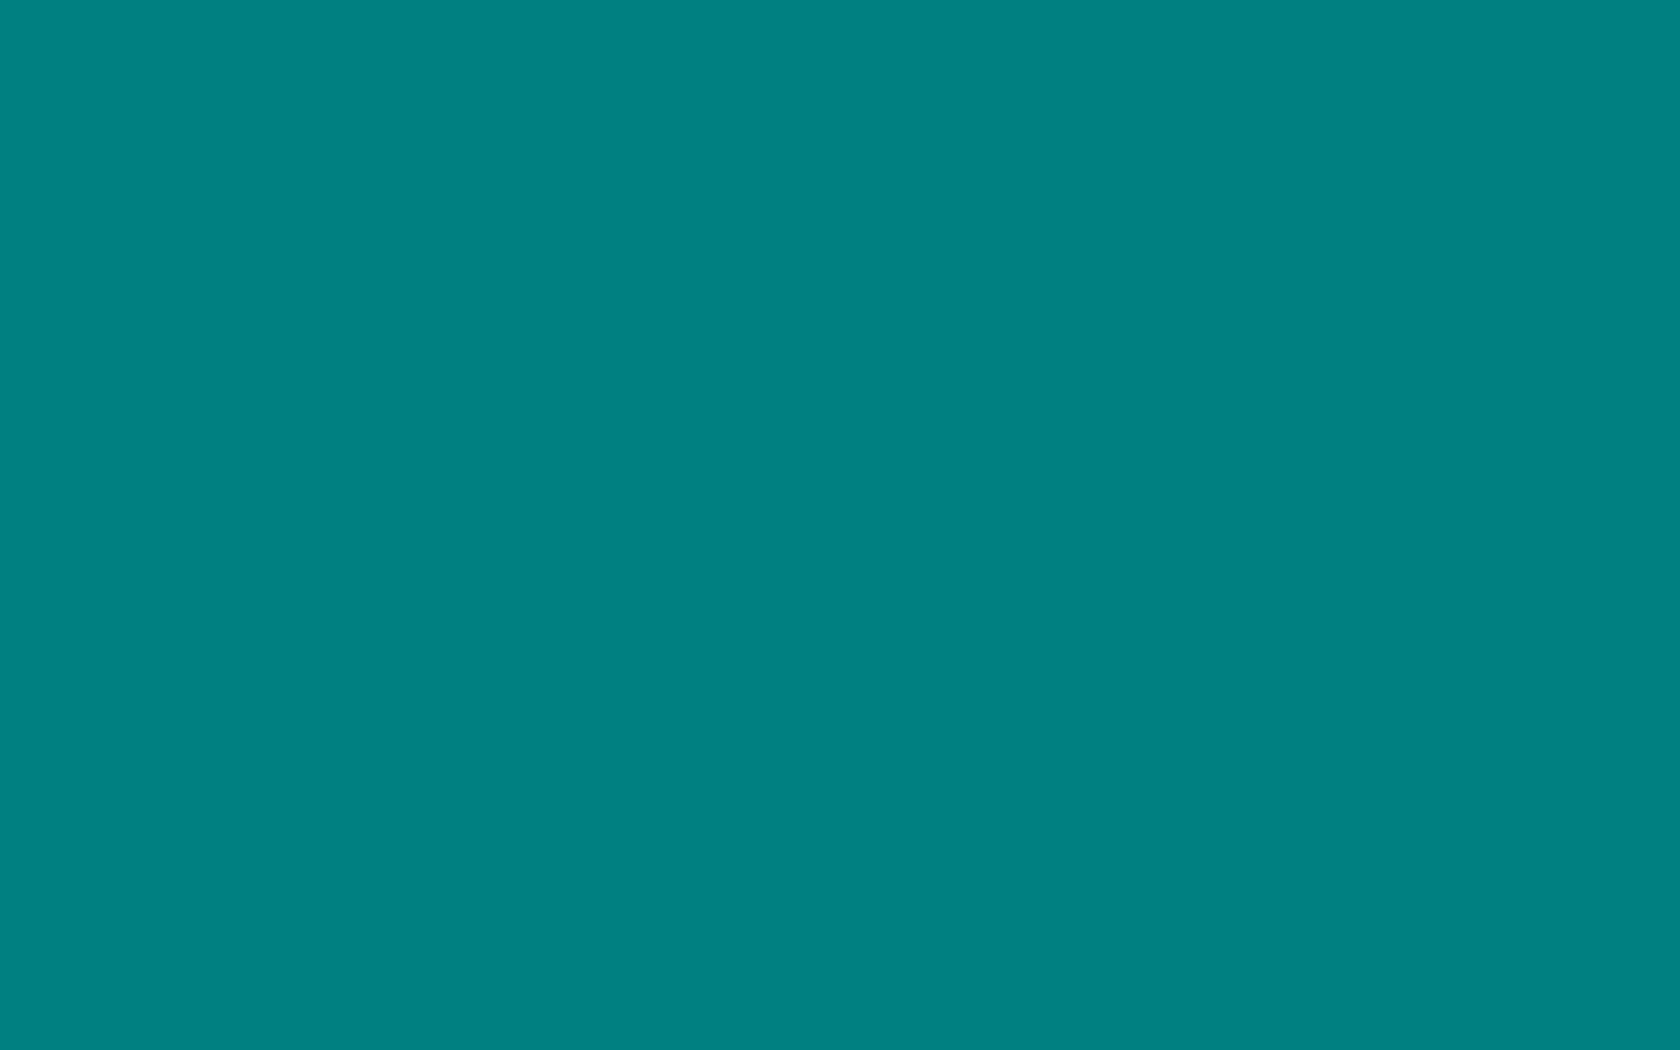 1680x1050 Teal Solid Color Background 1680x1050